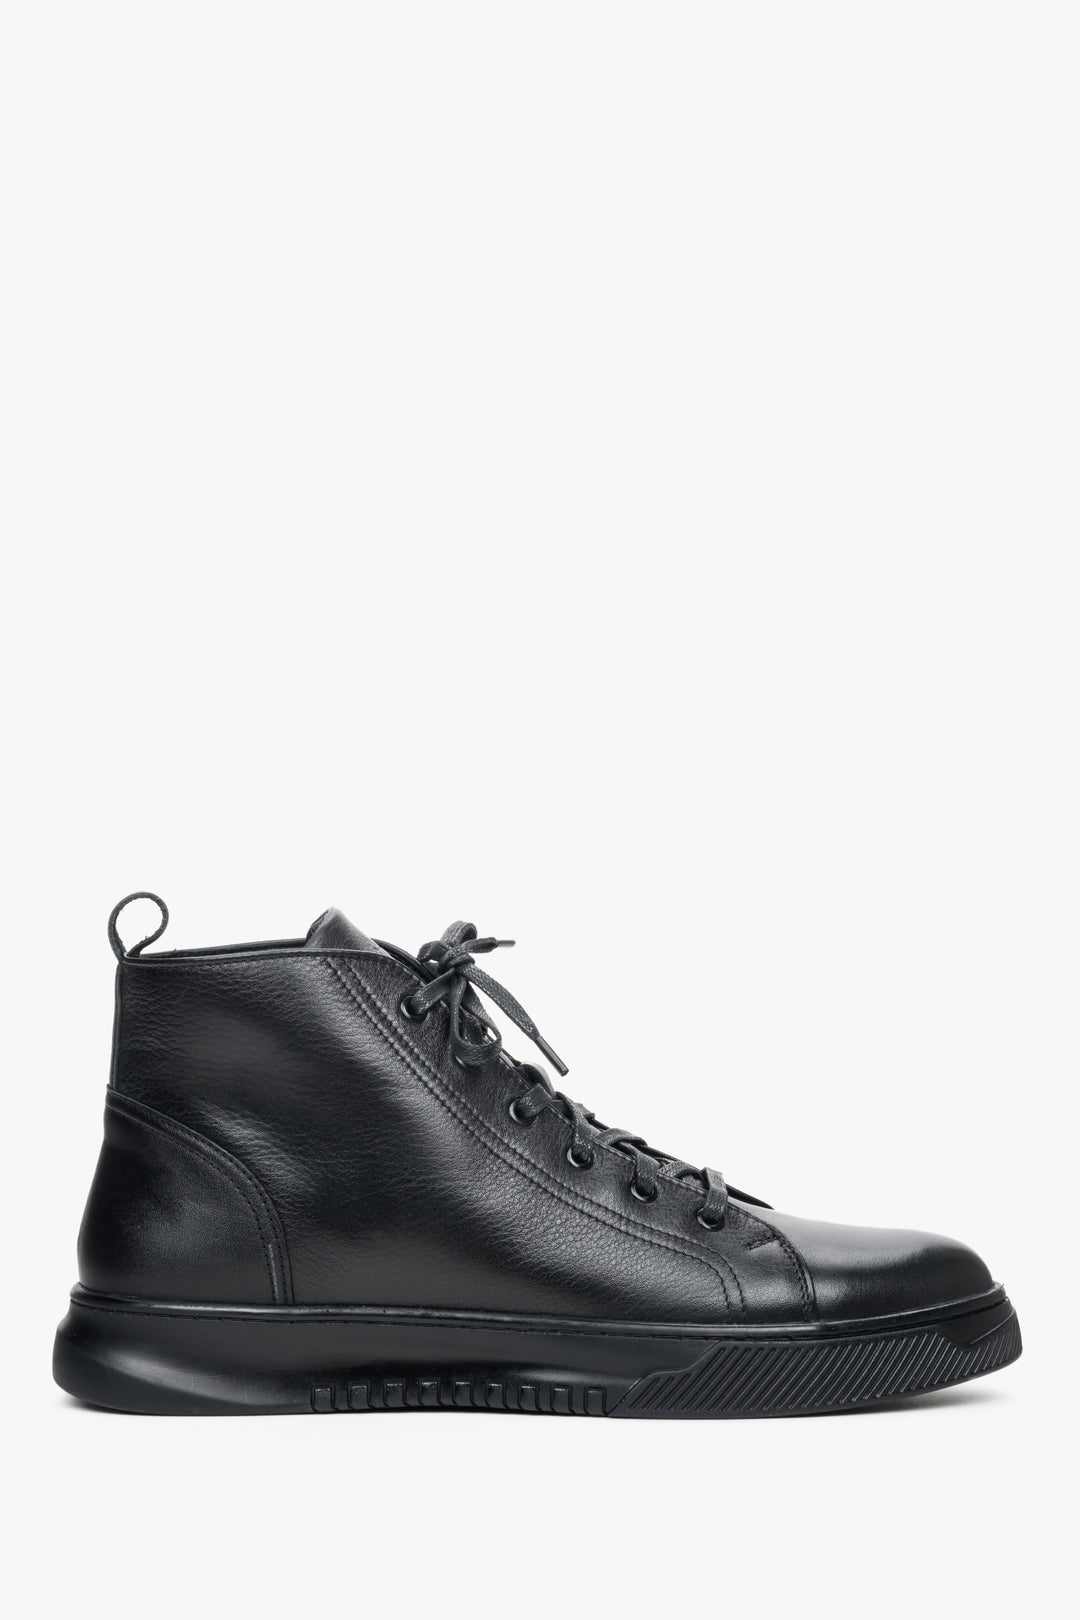 Men's sneakers in black color from natural leather Estro - shoe profile.